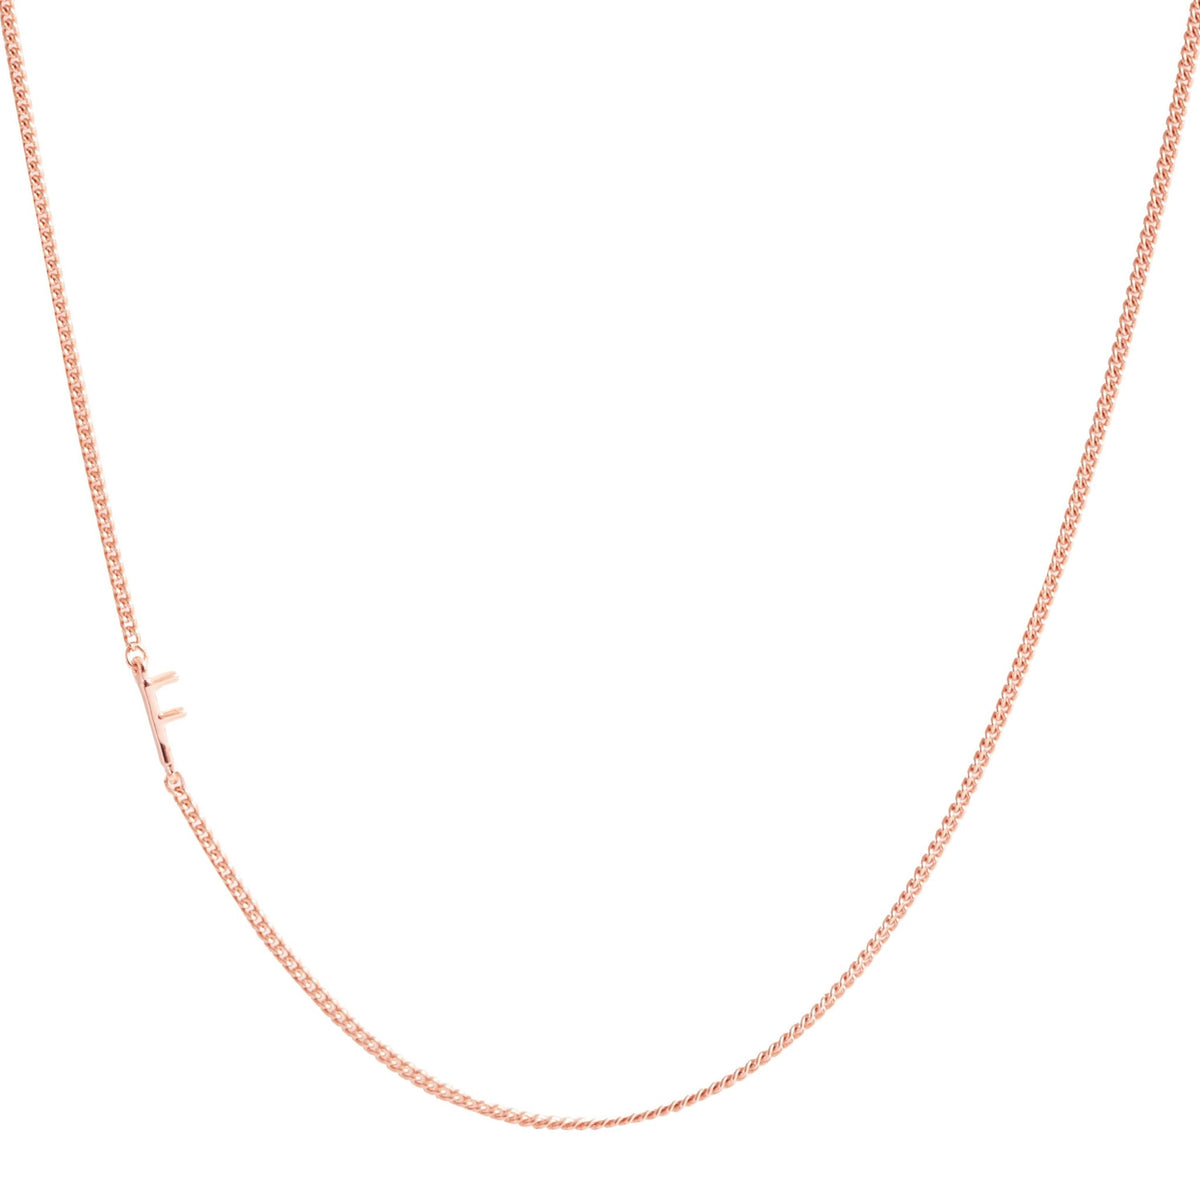 NOTABLE OFFSET INITIAL NECKLACE - F - GOLD, ROSE GOLD, OR SILVER - SO PRETTY CARA COTTER